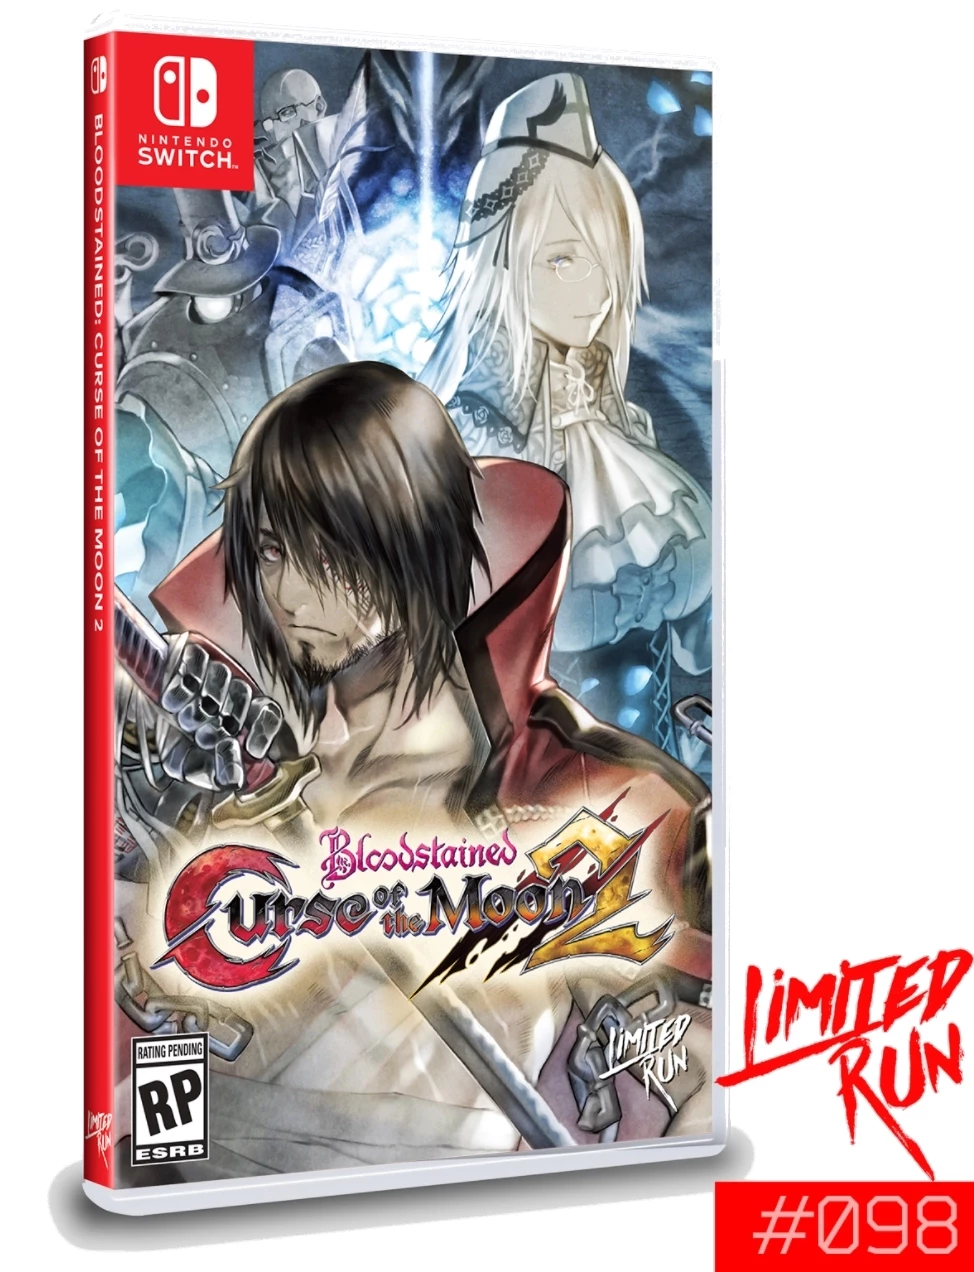 Bloodstained: Curse of the Moon 2 (Limited Run) (Switch), Inti Creates  